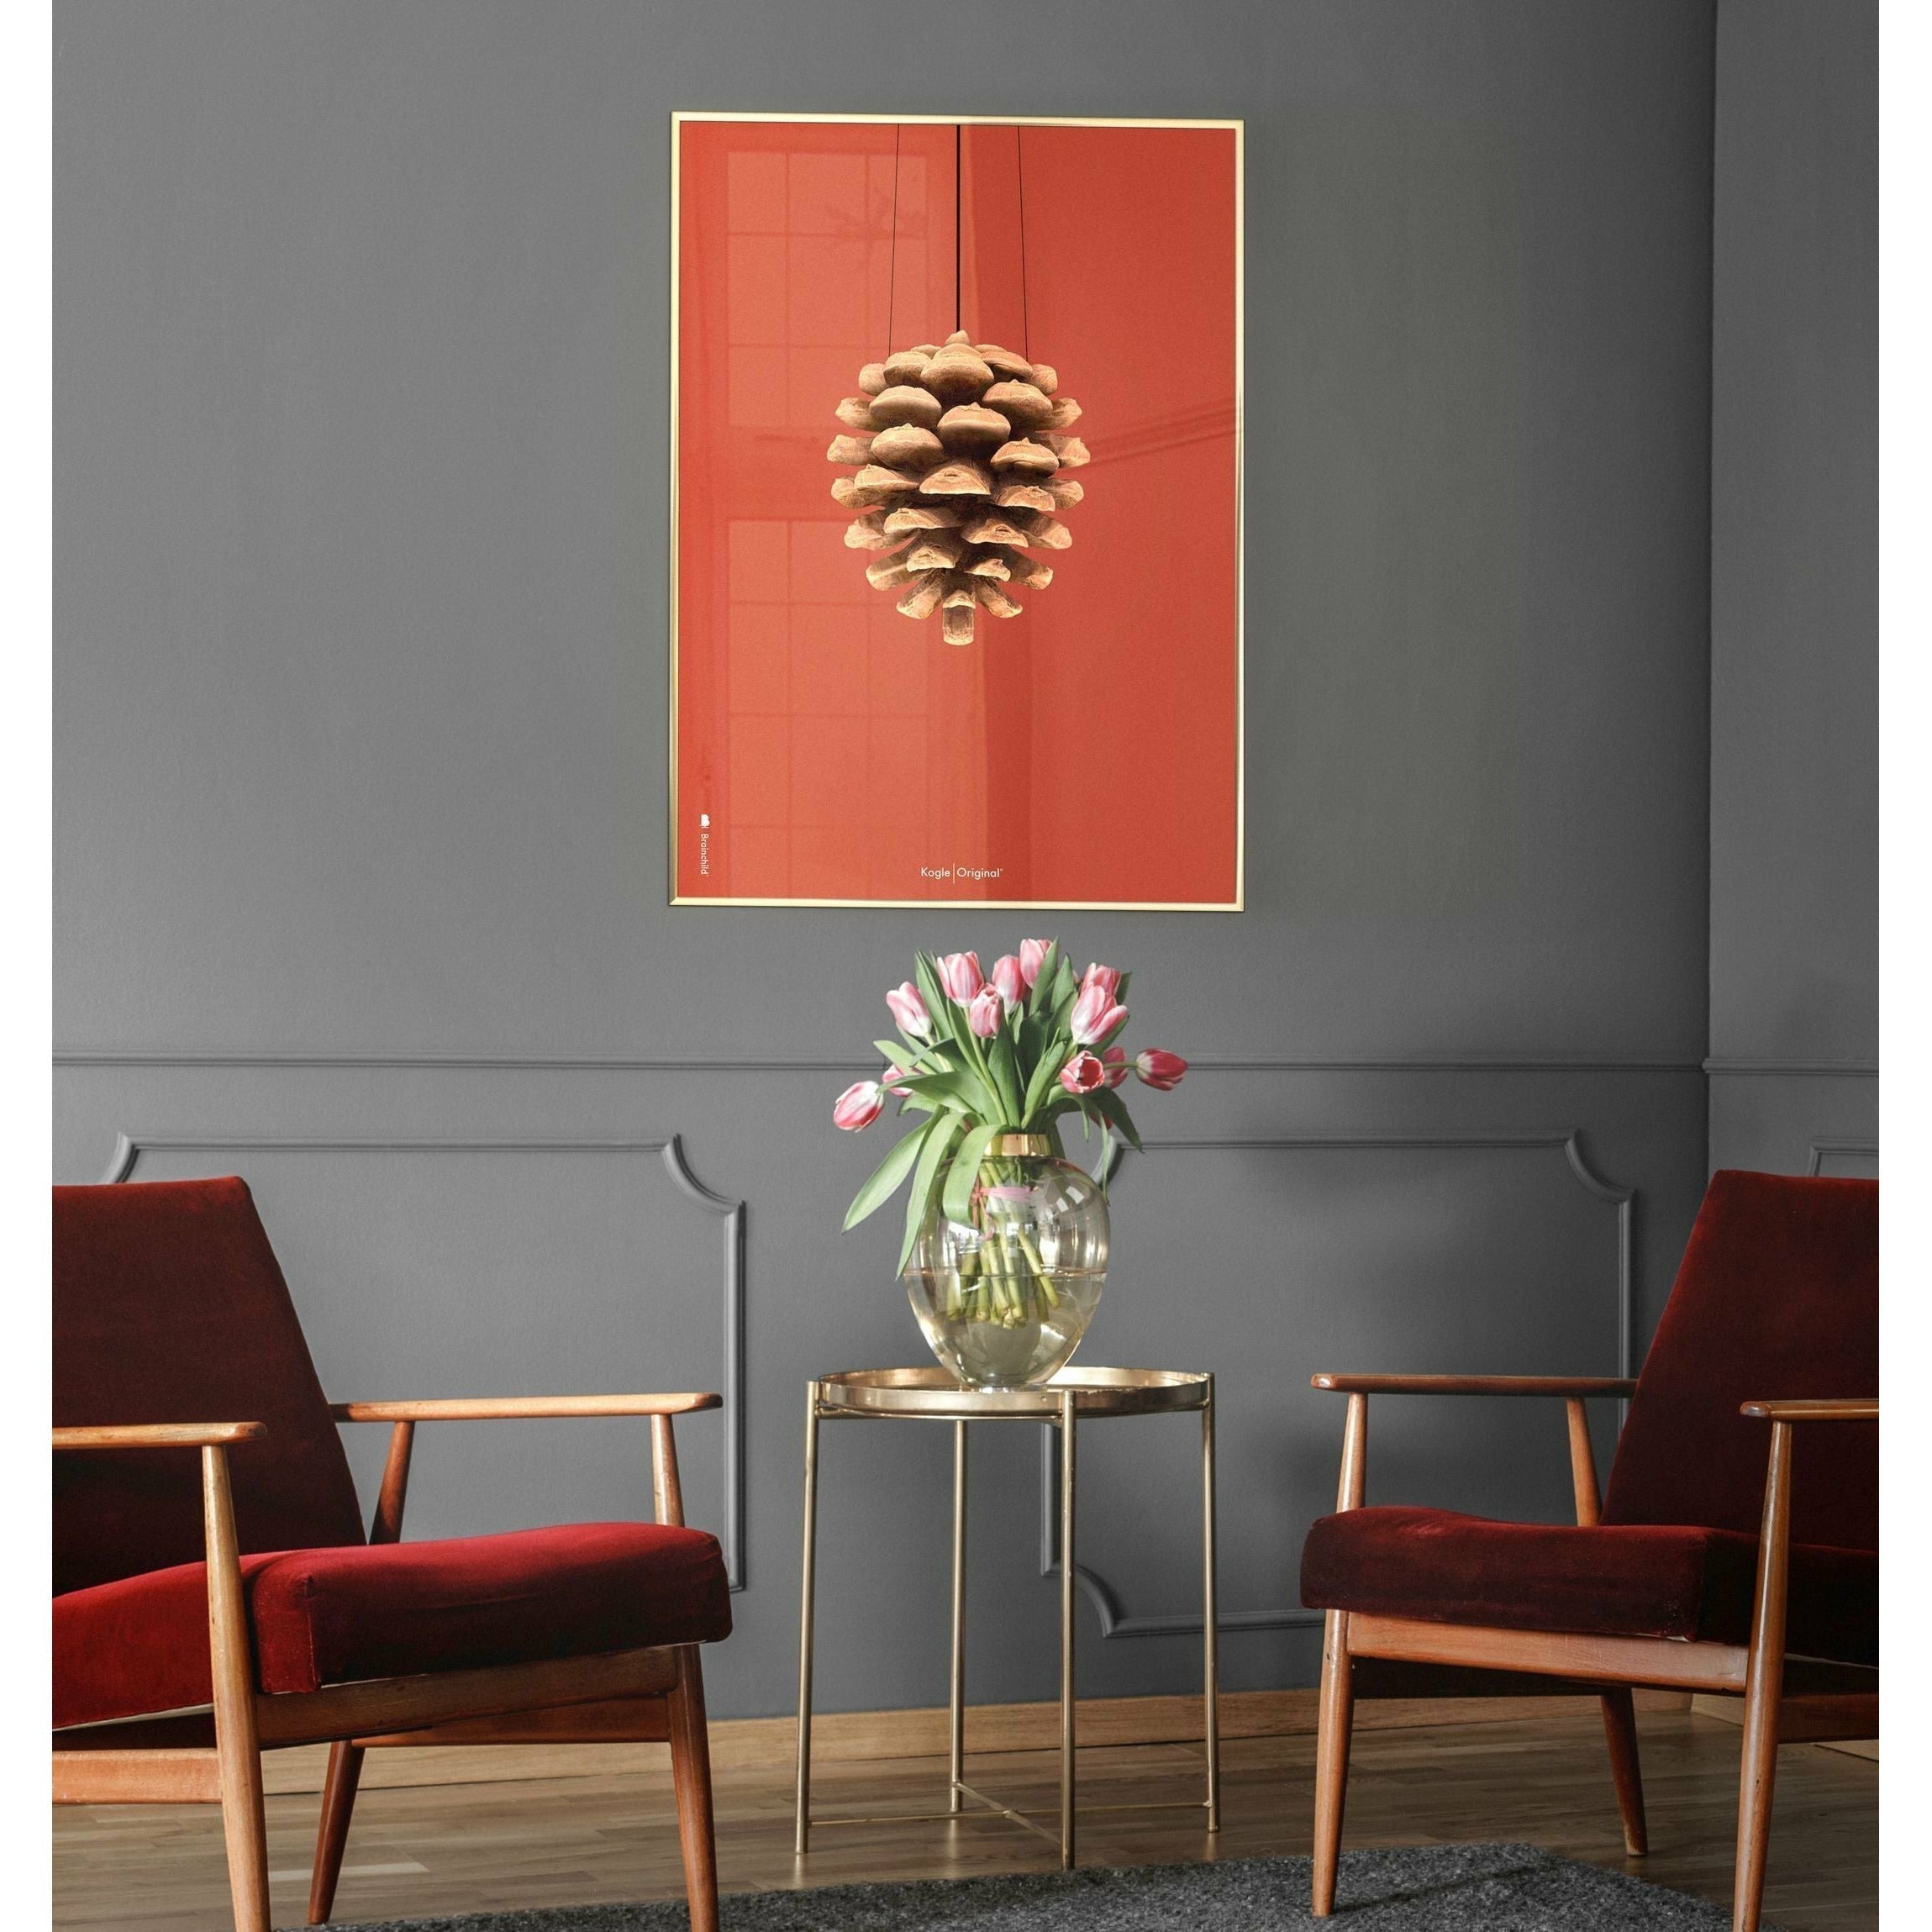 Brainchild Pine Cone Classic Poster, Frame In Black Lacquered Wood 50x70 Cm, Red Background